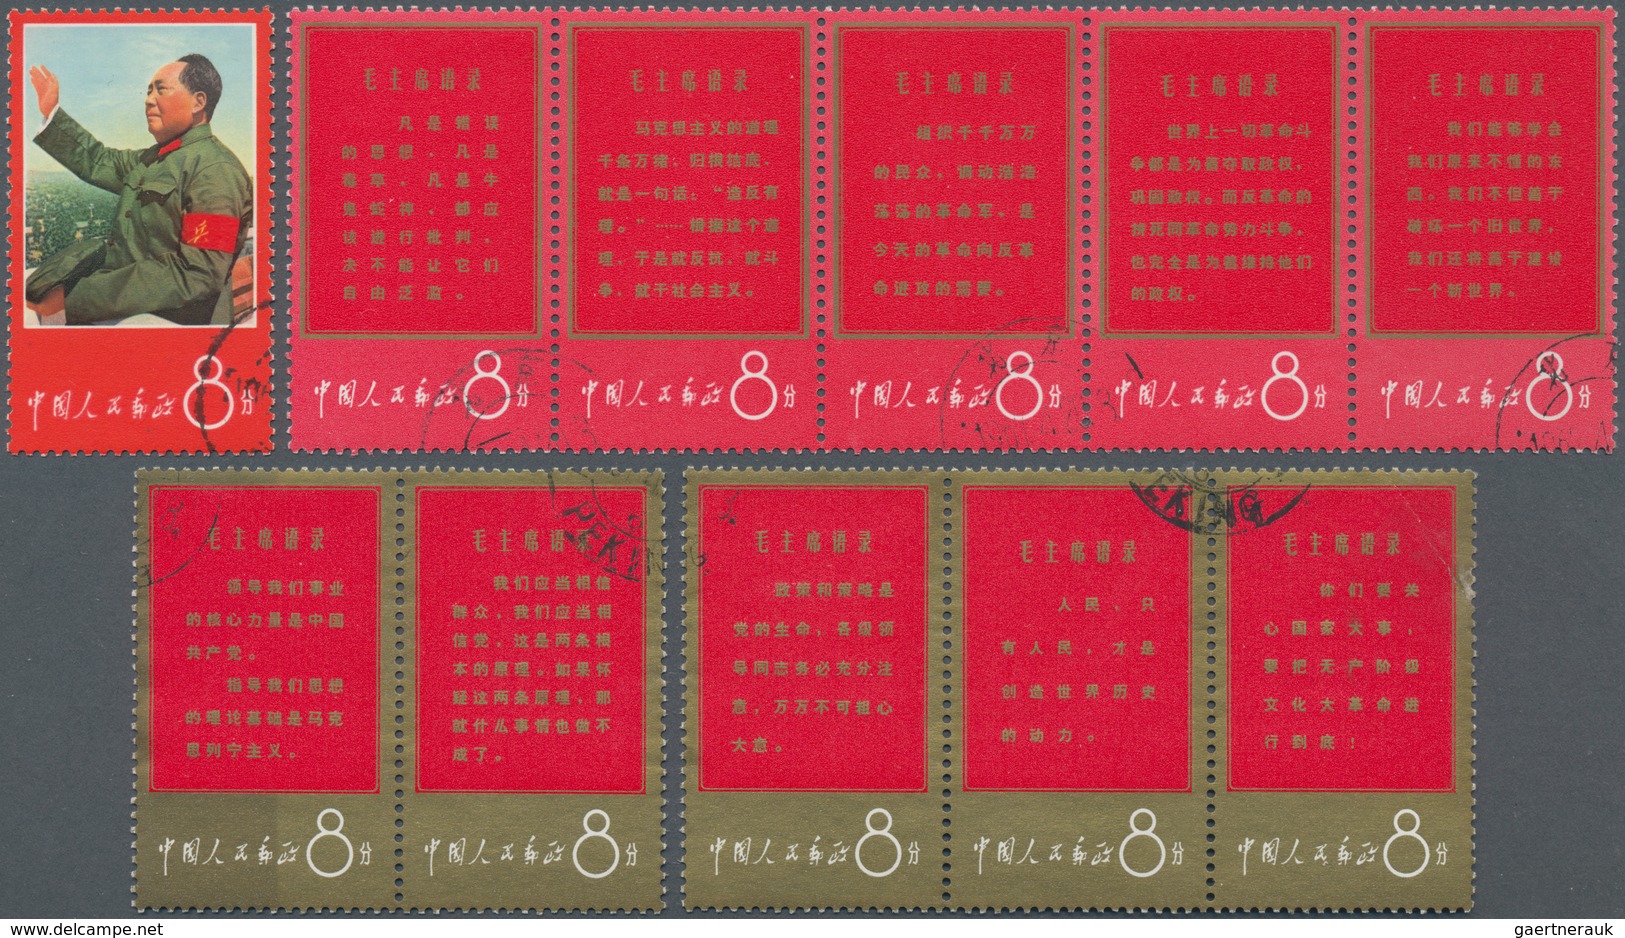 China - Volksrepublik: 1967, Thoughts Of Mao Tse-tung (1st Issue), Set Of 11 CTO Used, The Second St - Lettres & Documents